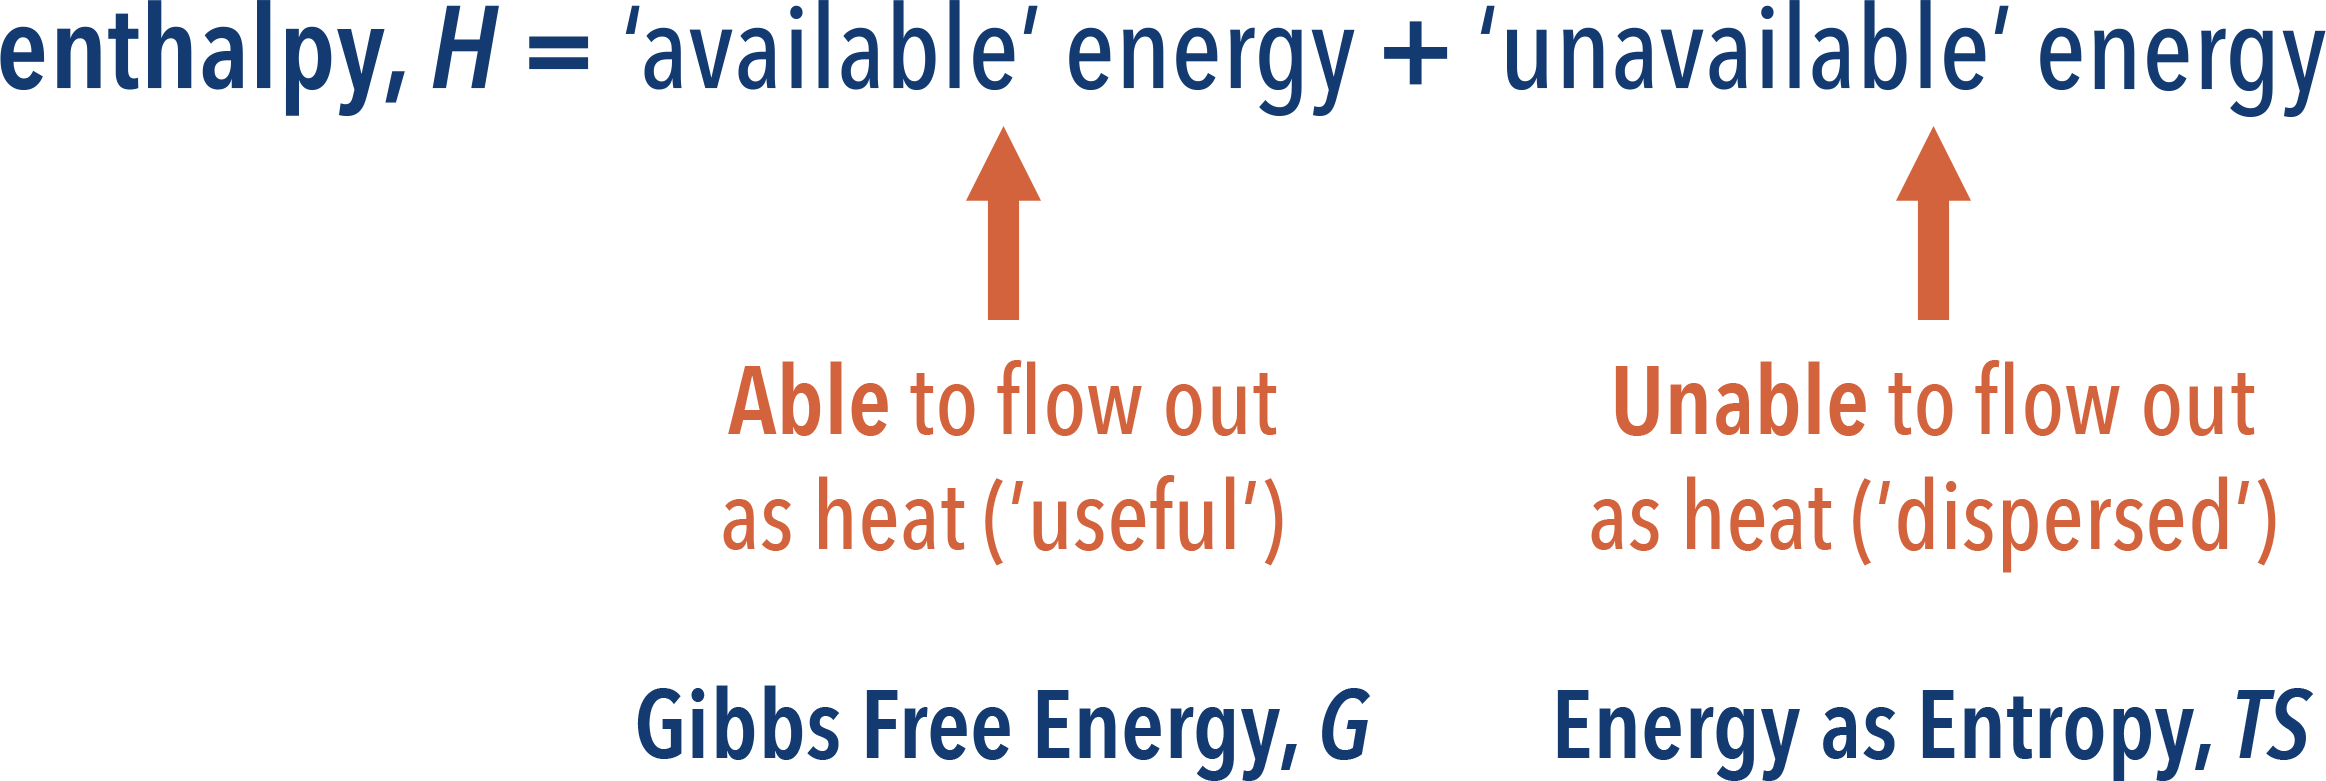 enthalpy and gibbs free energy entropy a-level chemsitry